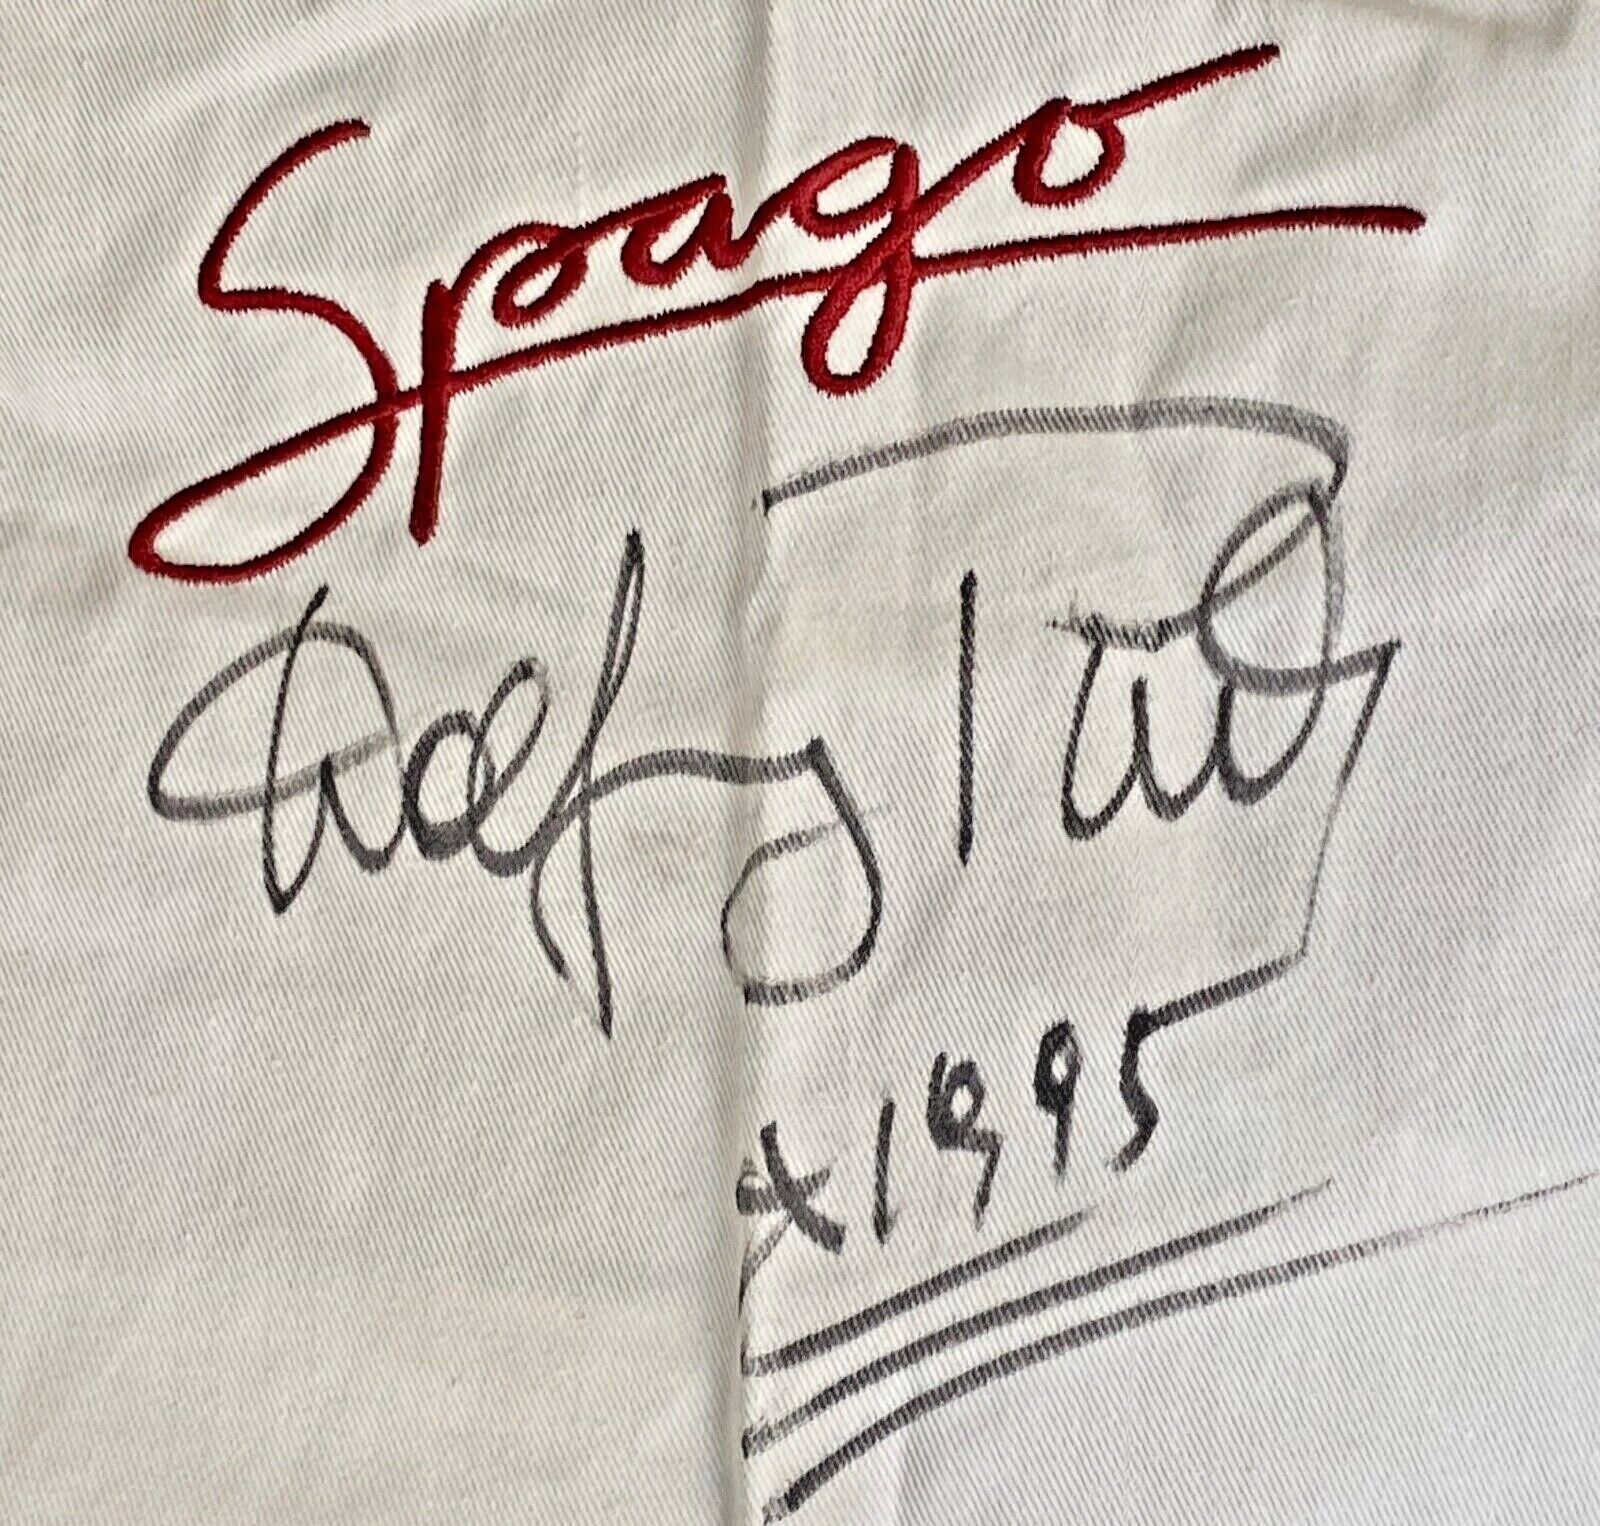 WOLFGANG PUCK SIGNED "SPAGO" APRON + "ADVENTURES IN THE KITCHEN" BOOK Без бренда - фотография #2